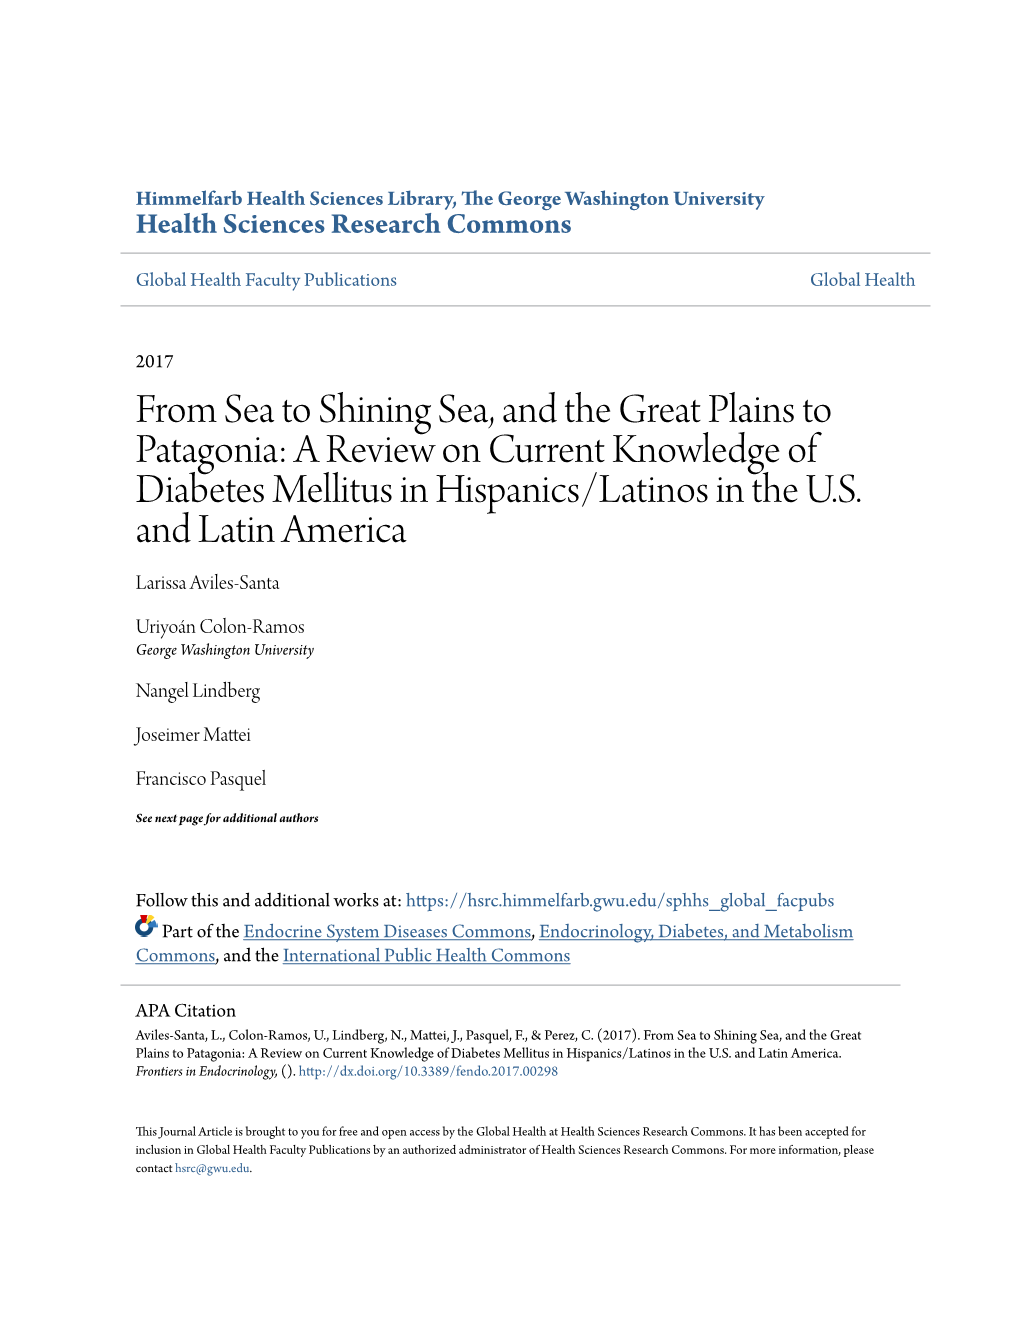 A Review on Current Knowledge of Diabetes Mellitus in Hispanics/Latinos in the U.S